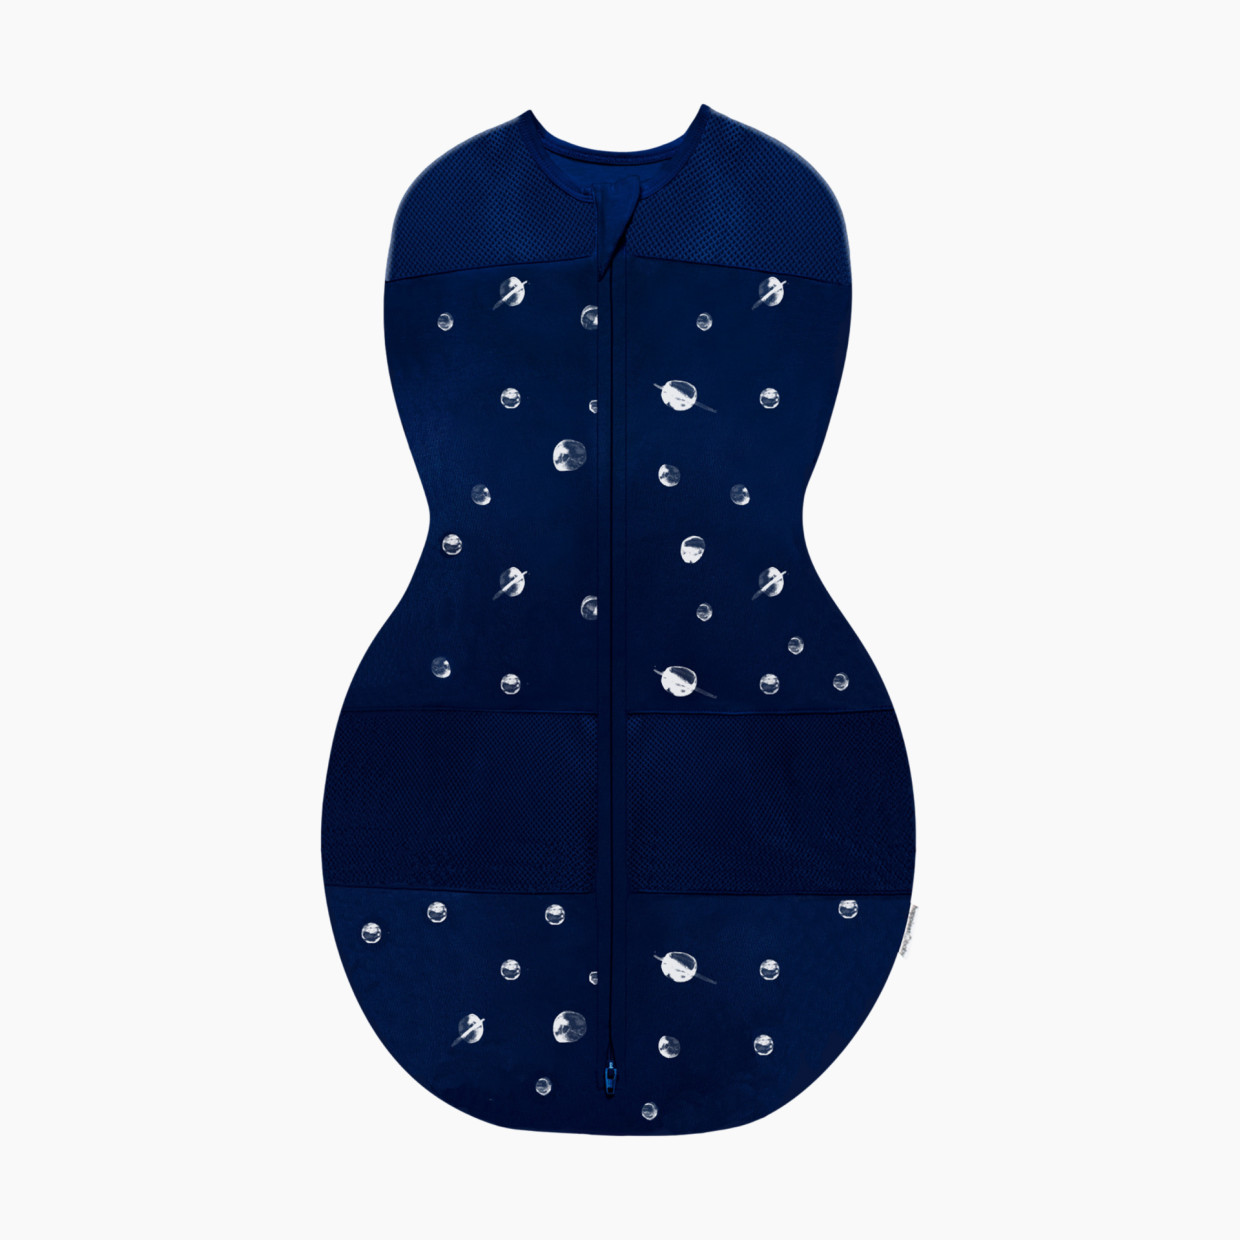 Happiest Baby Sleepea - Midnight Planets, Large.